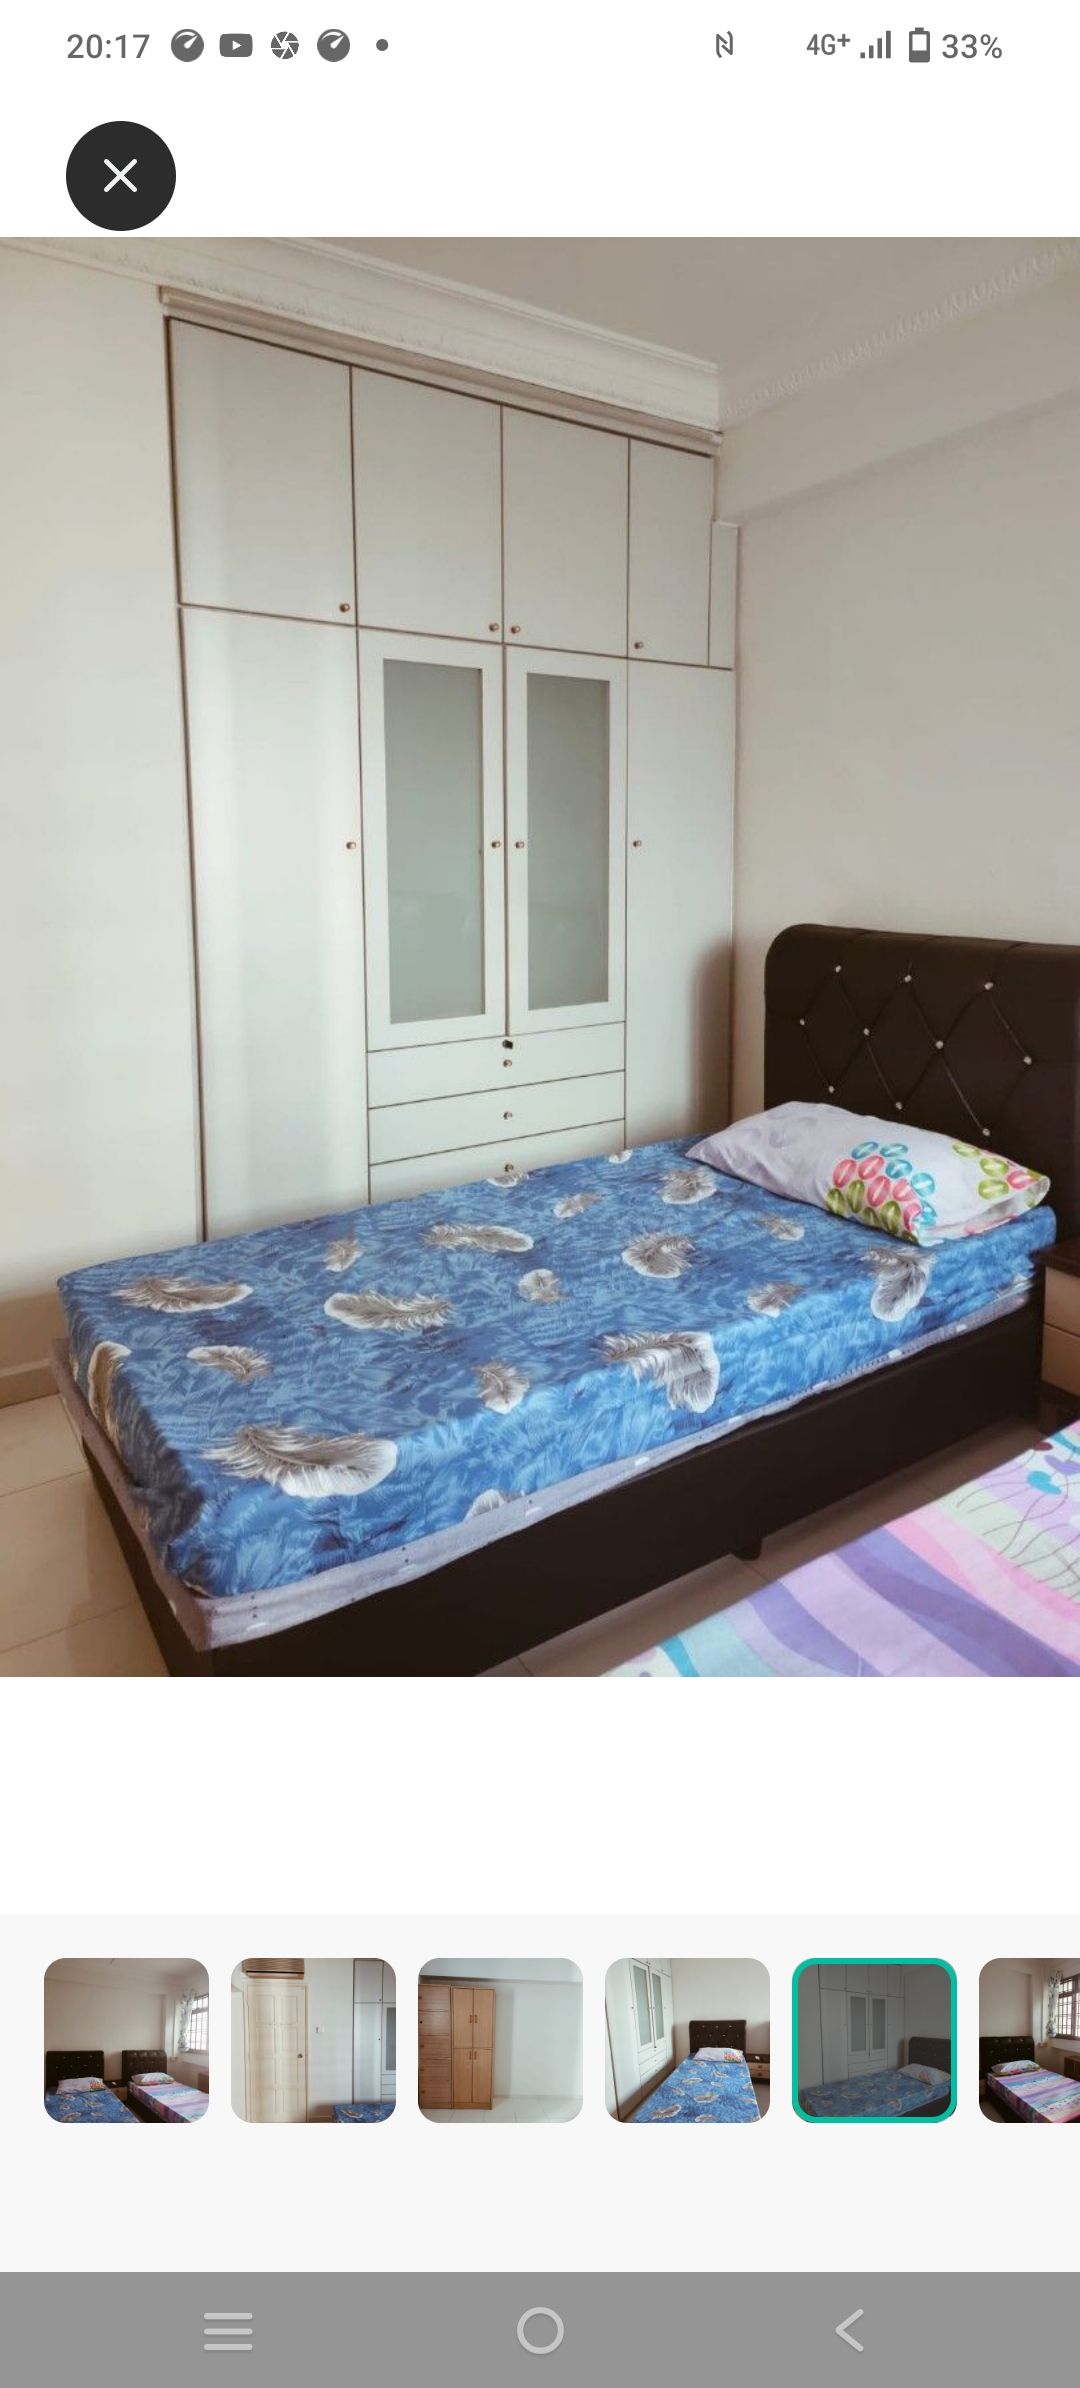 HDB For Rent, Hdb Room For Rental, D04:, 1,200 SGD, 99-year, Floor